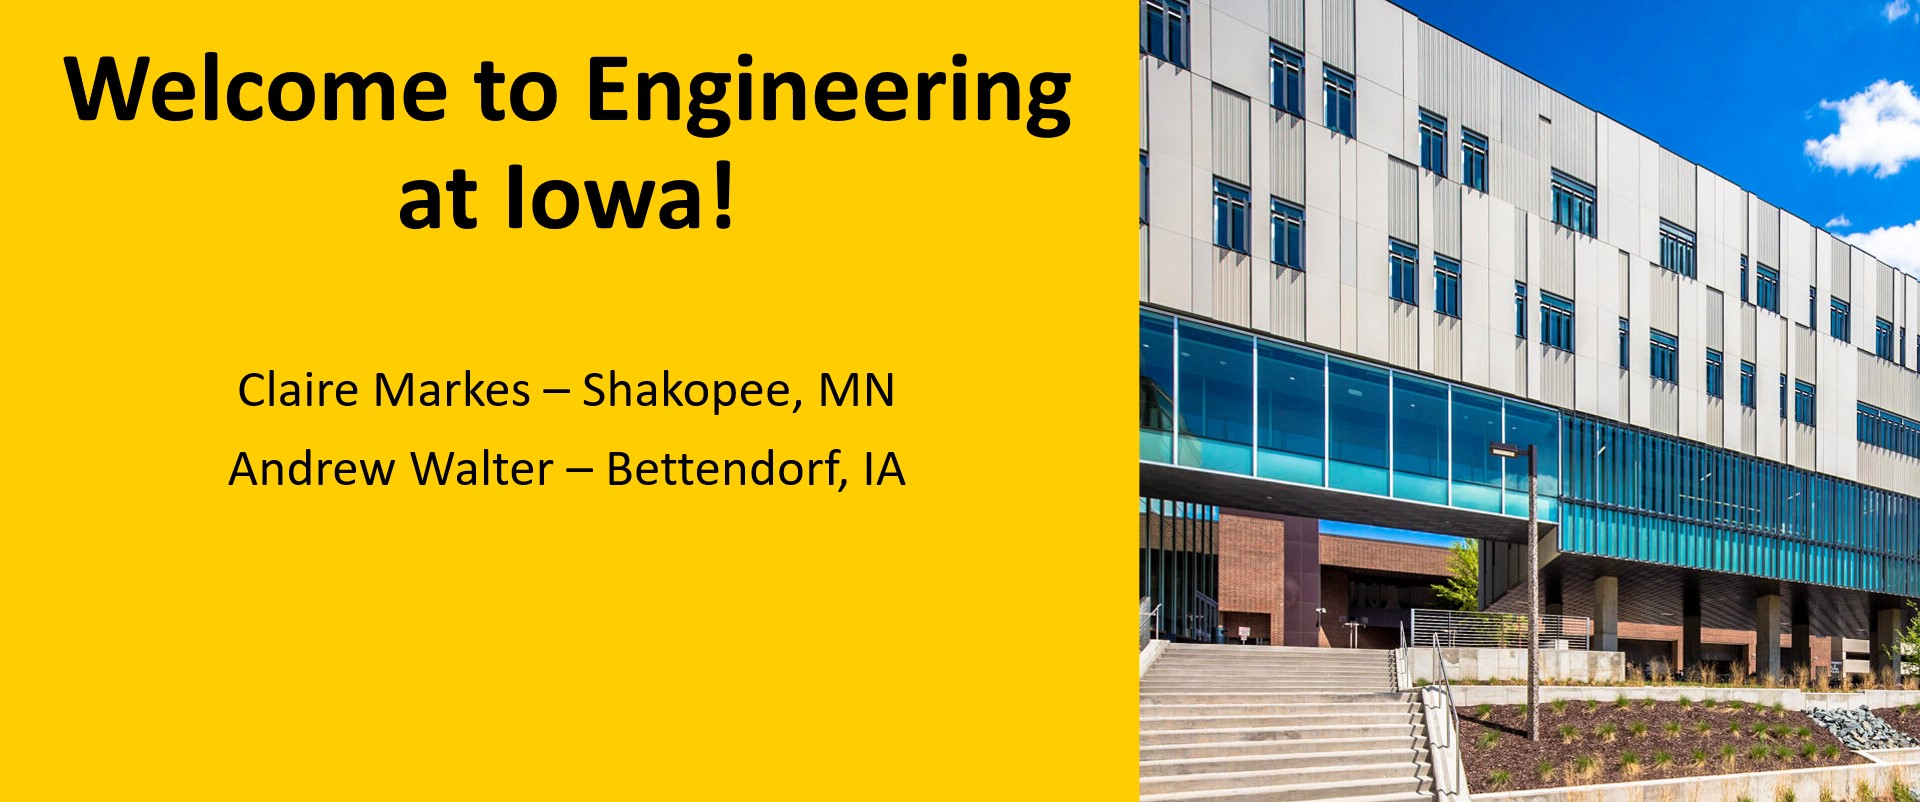 Welcome to Engineering at Iowa! Claire Markes – Shakopee, MN​  Andrew Walter – Bettendorf, IA